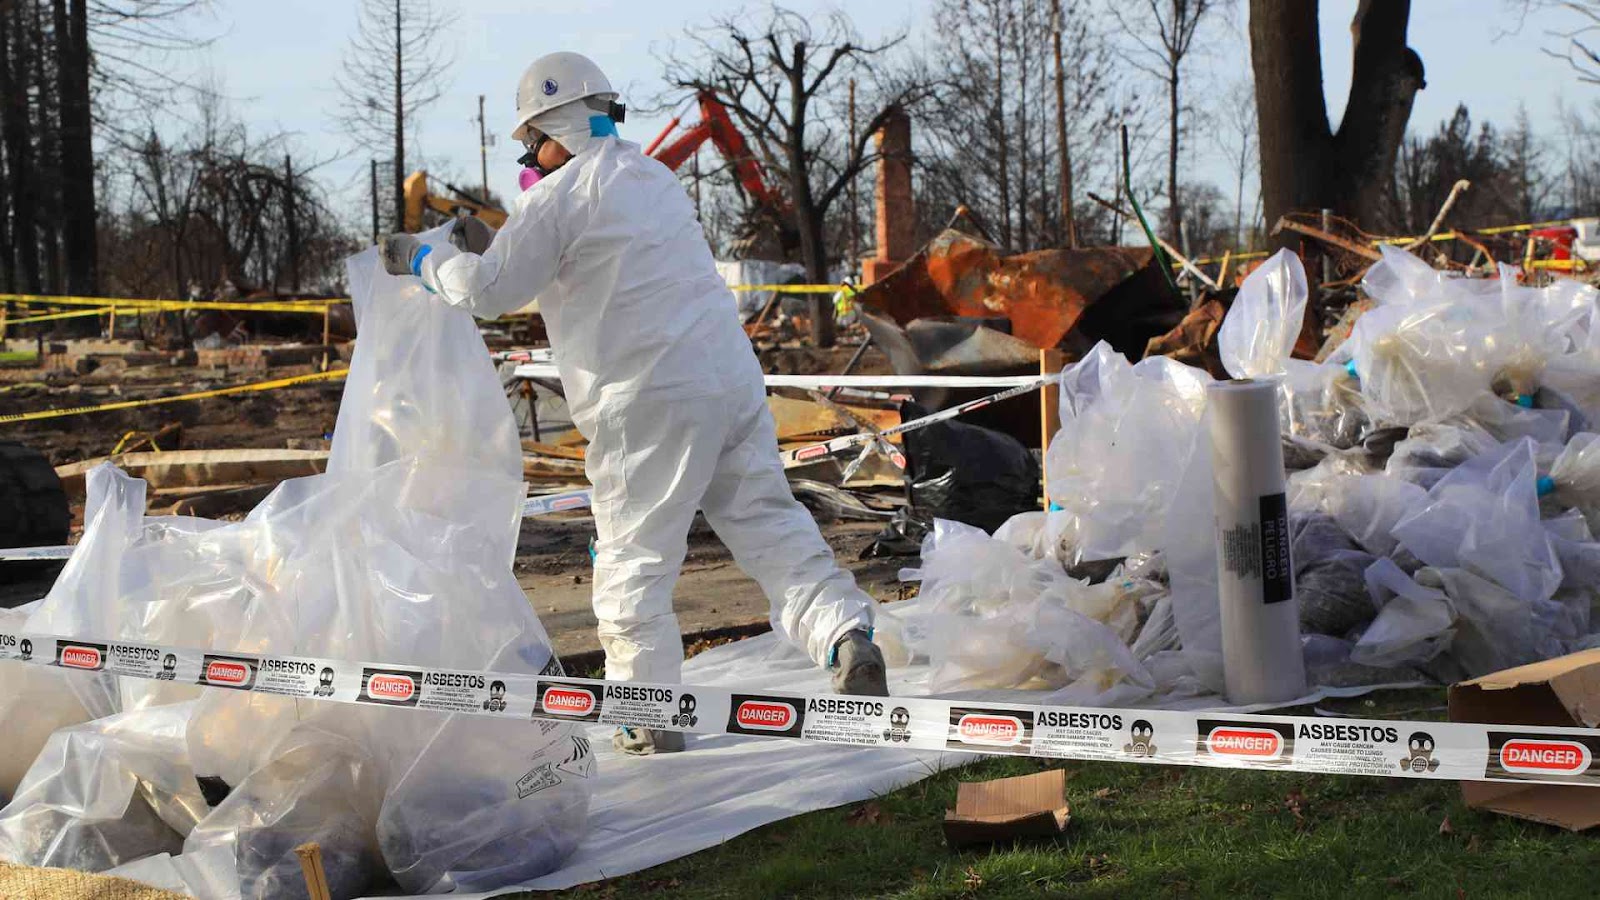 Why Asbestos Kills Nearly 100,000 People Every Year